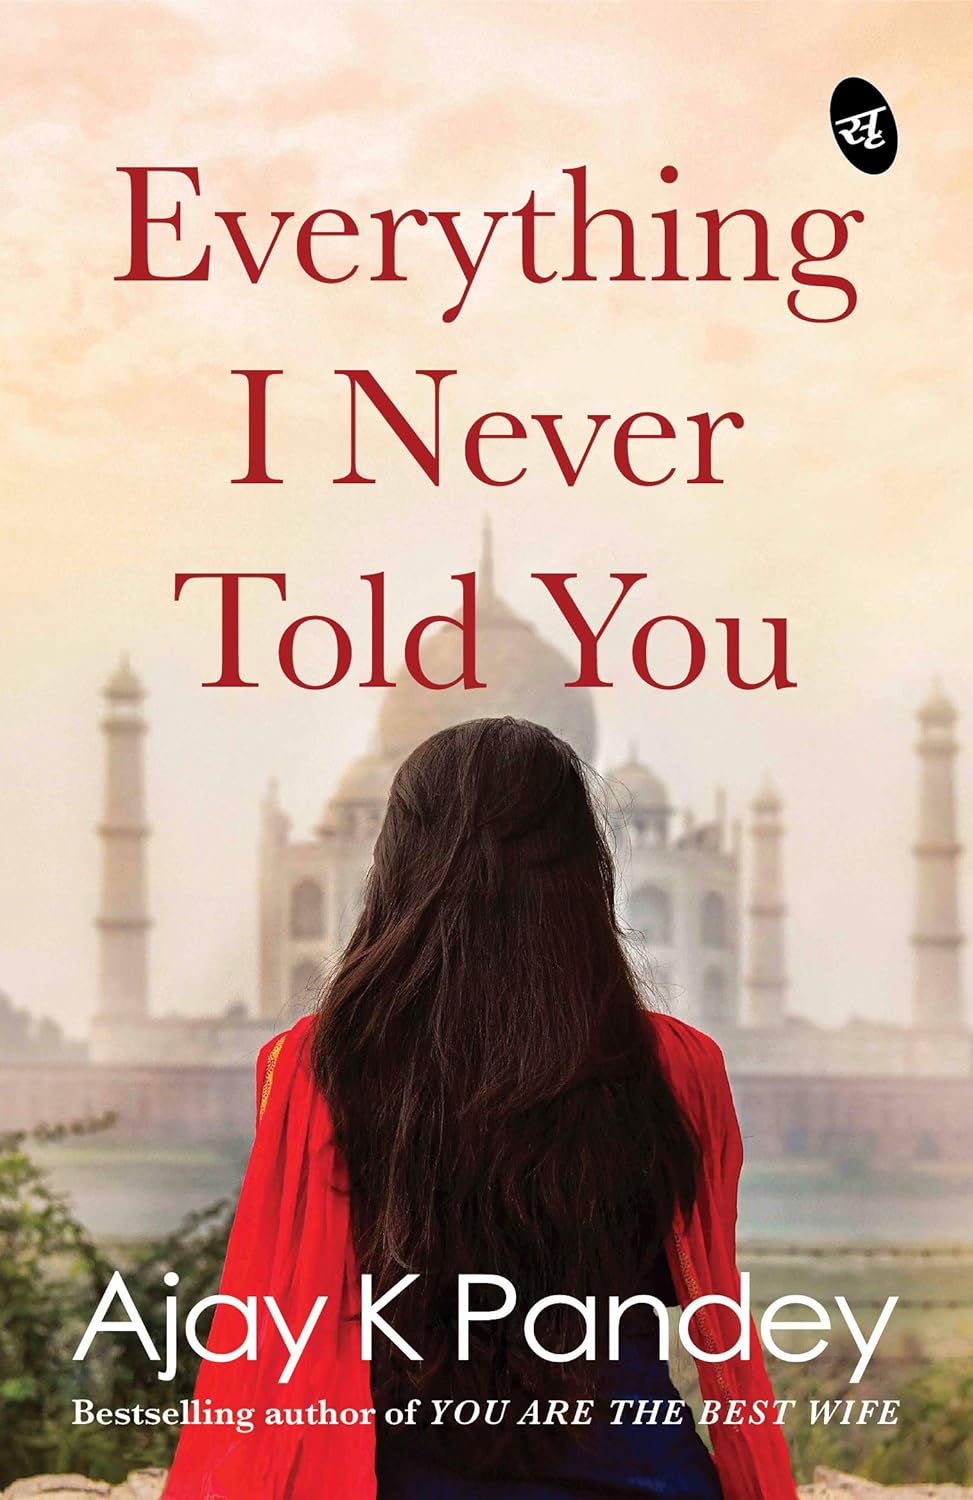 Everything I Never Told You-Ajay K Pandey-Stumbit Women and Girls